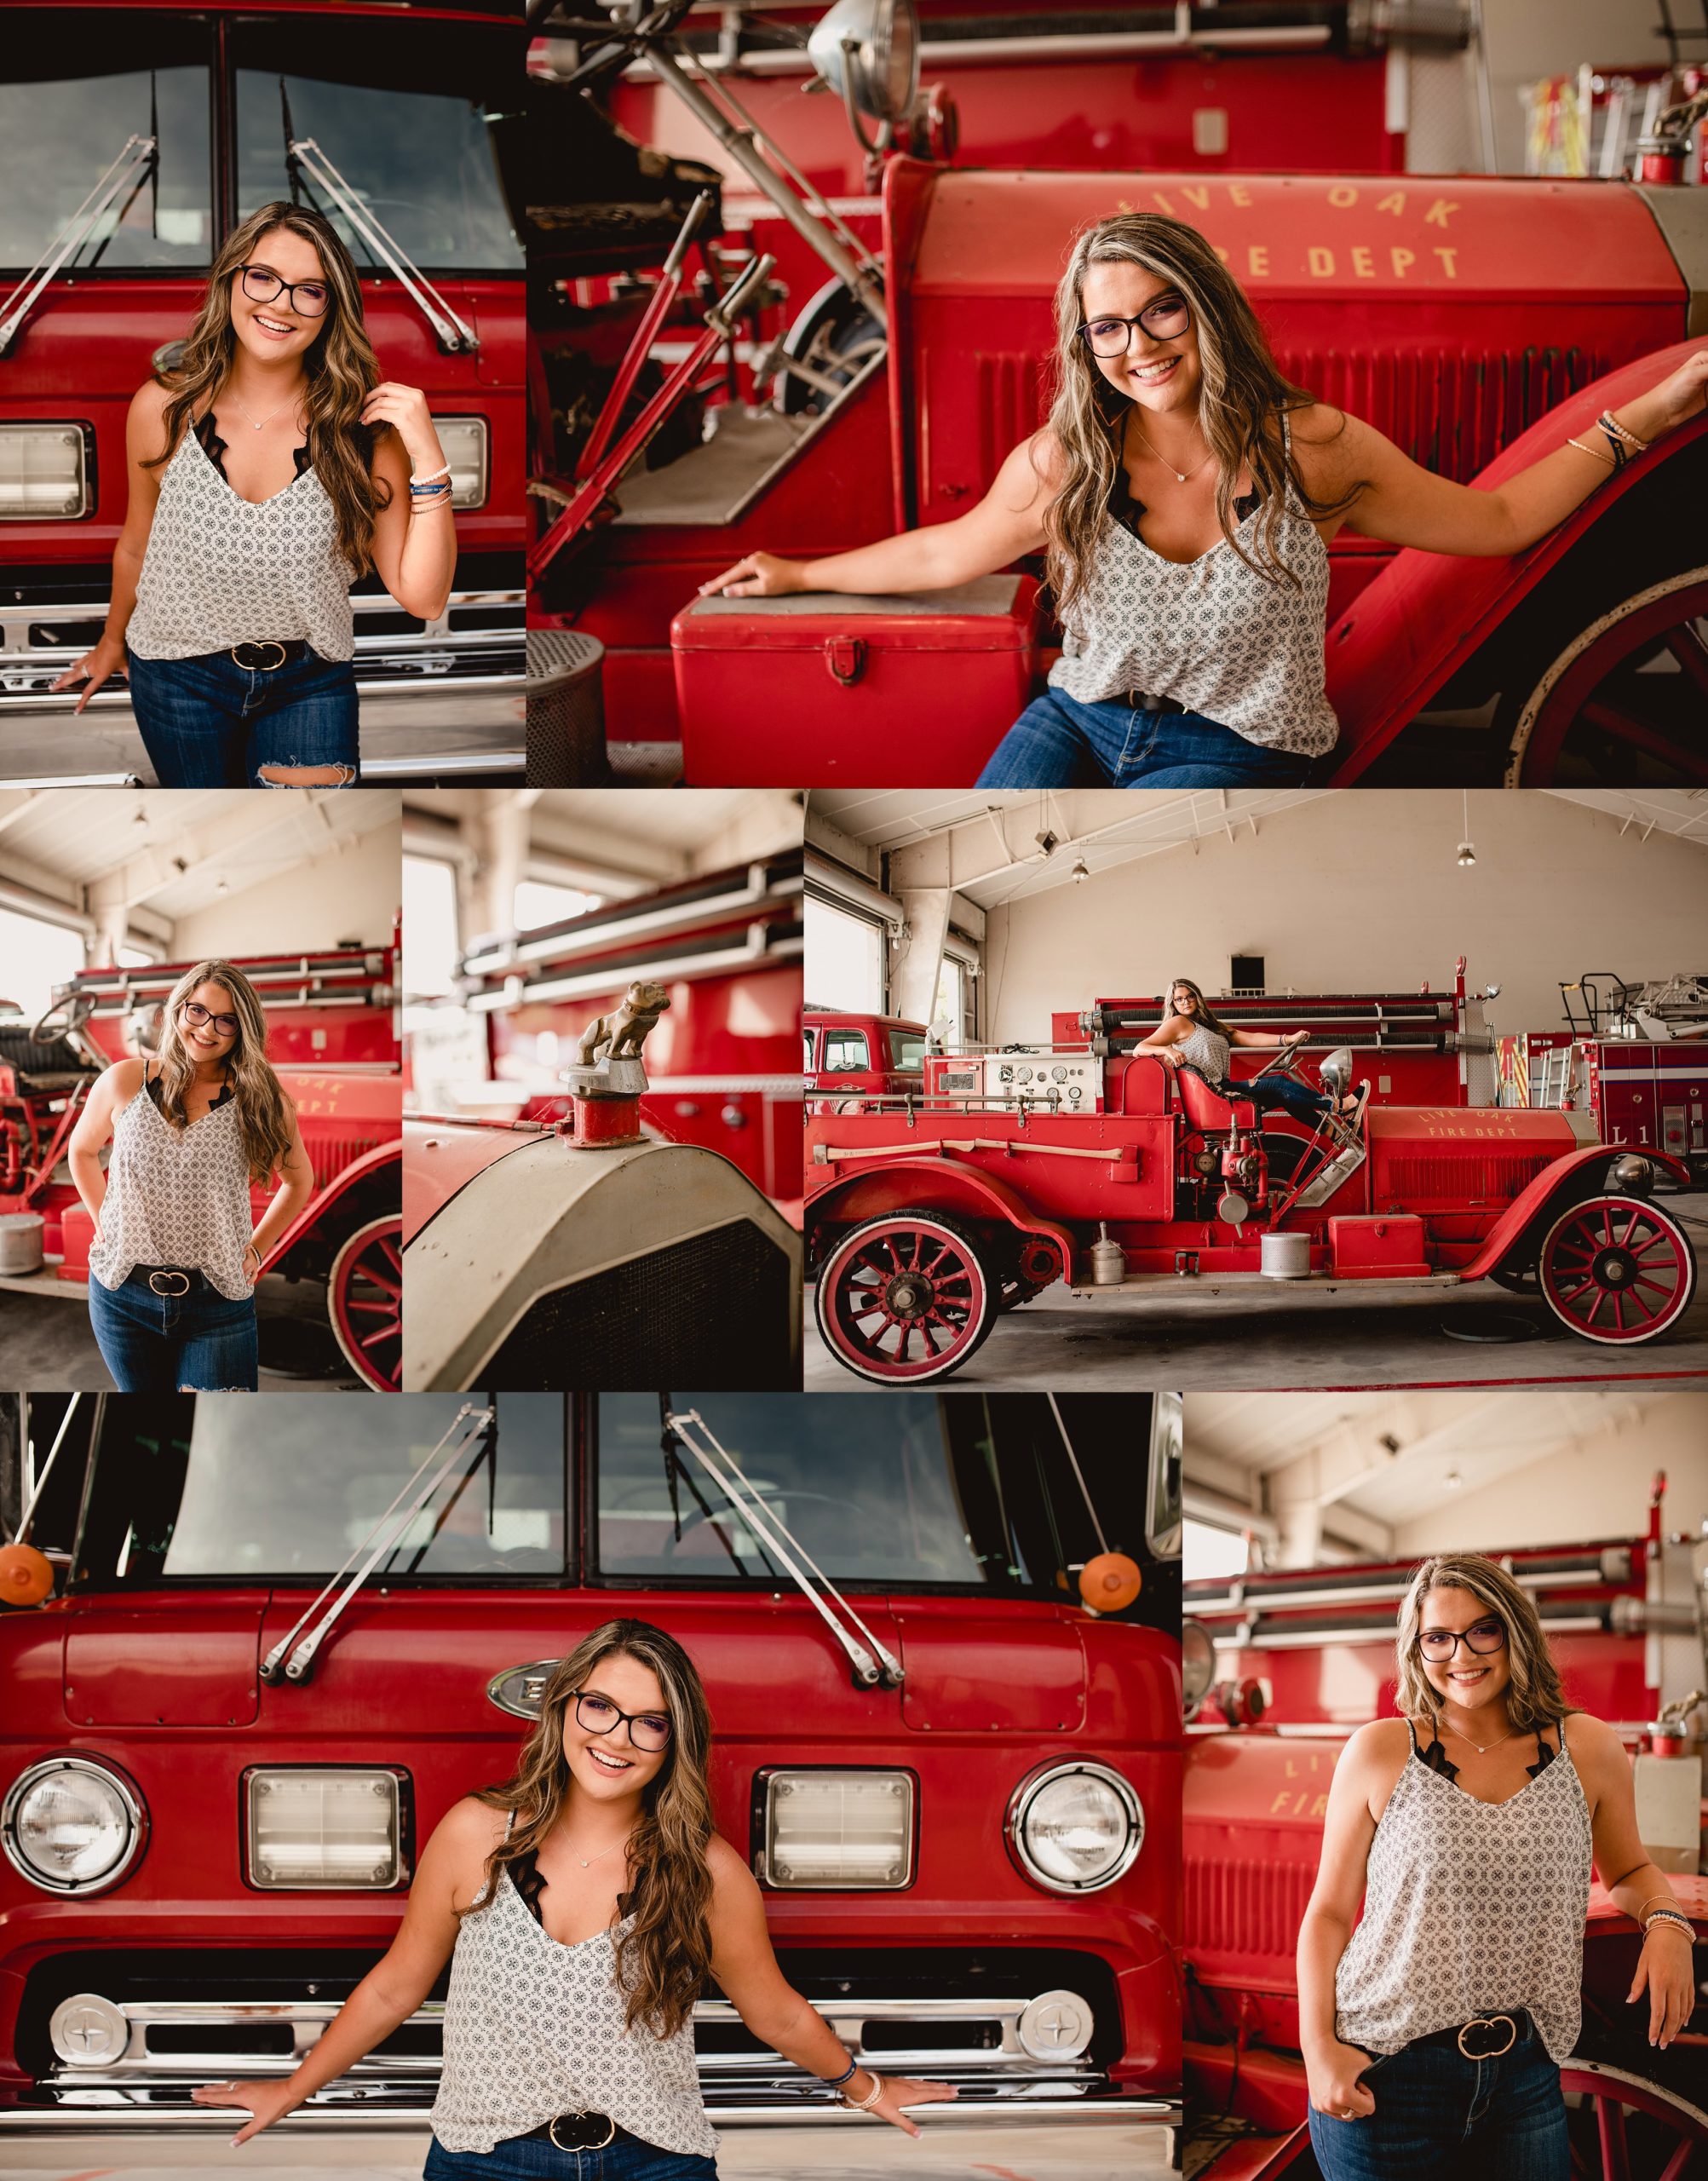 Senior picture ideas with a fire truck.